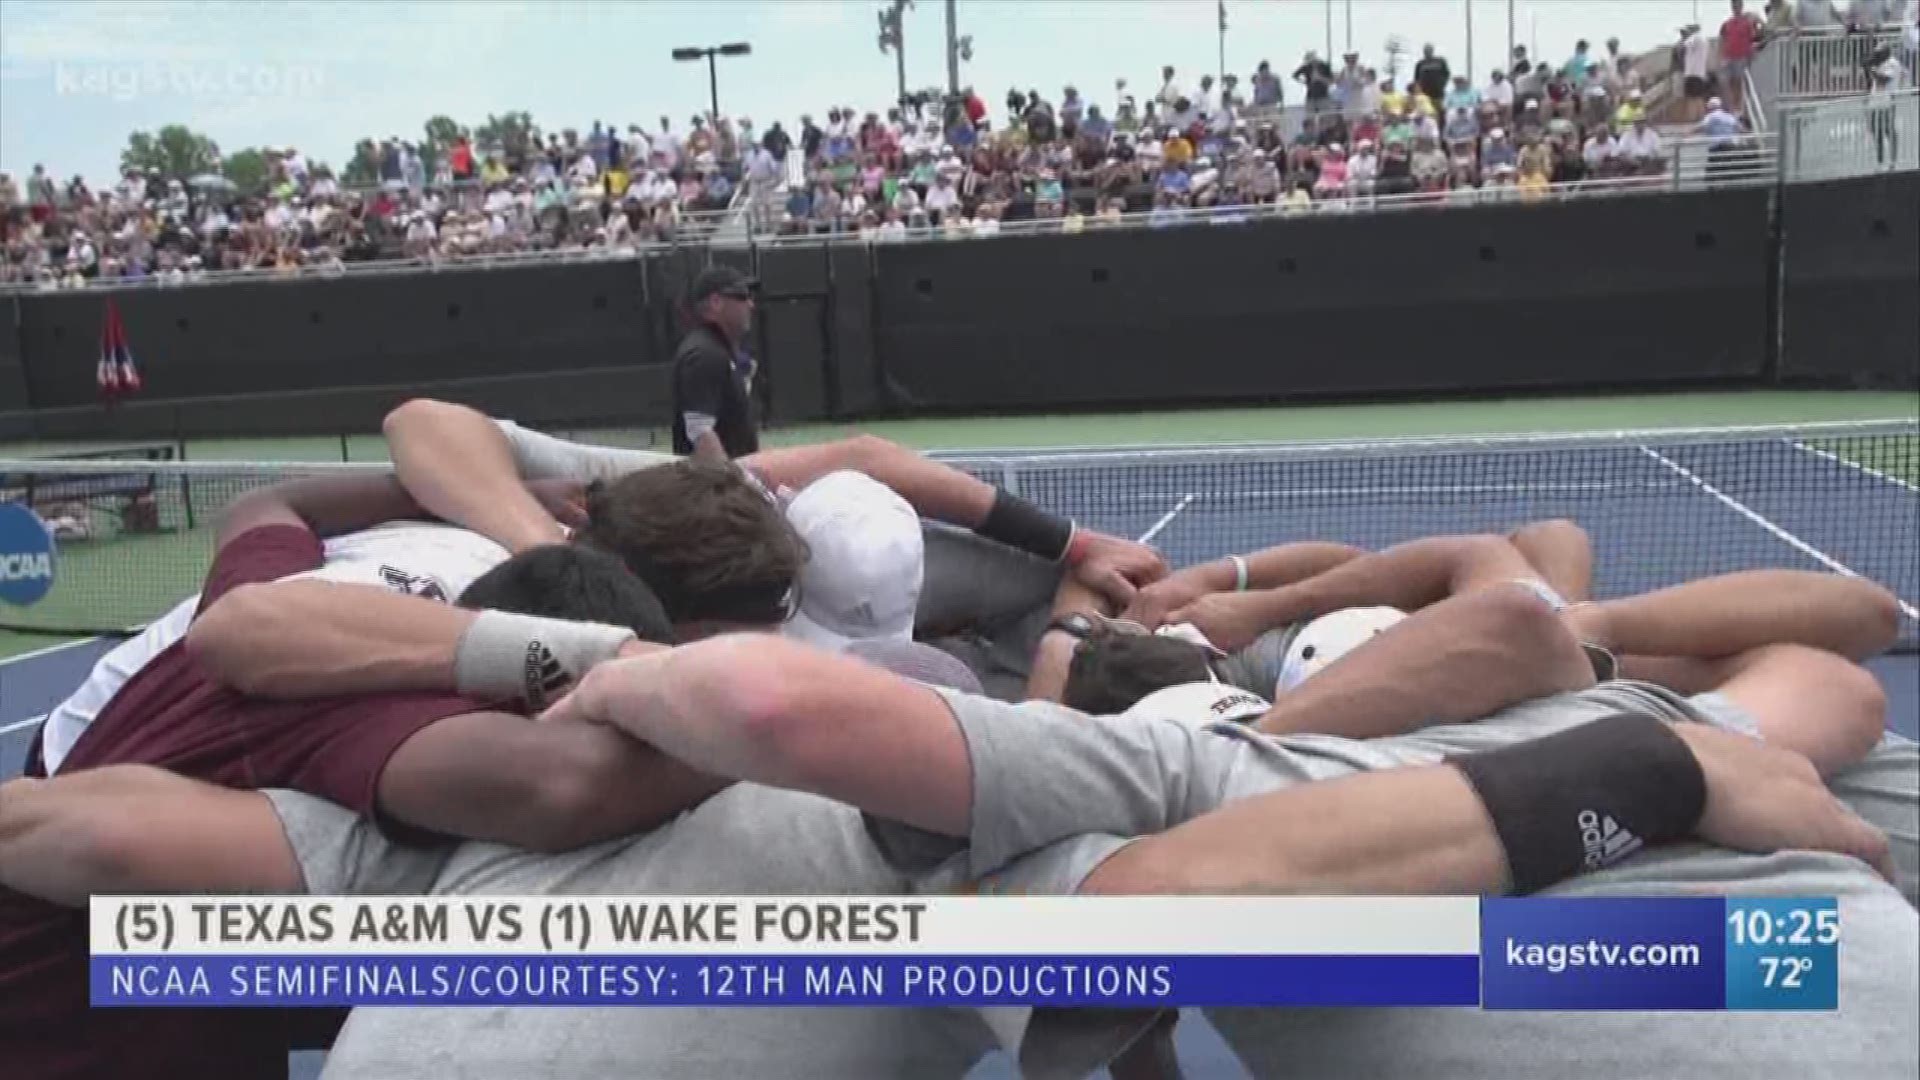 No. 5 Texas A&M men's tennis lost to No.1 Wake Forest 4-3 in the NCAA Semifinals on Monday.